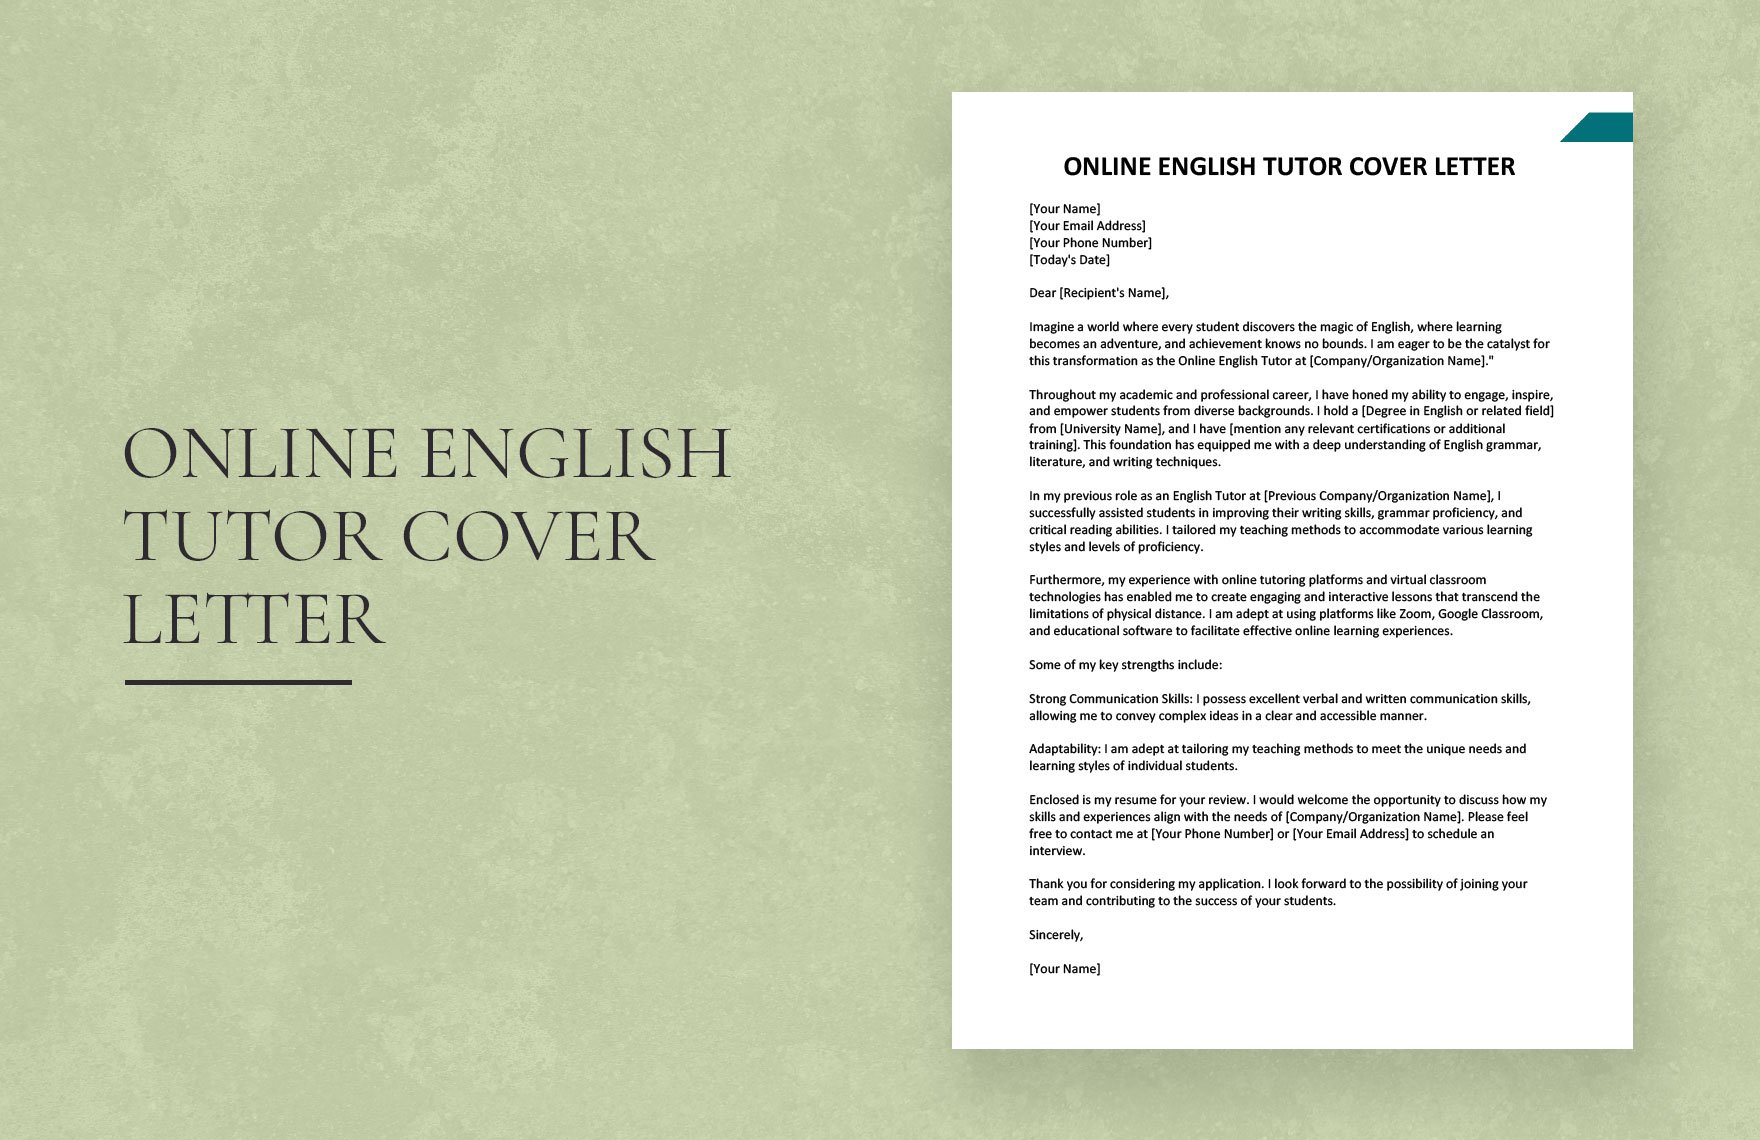 Online English Tutor Cover Letter in Word, Google Docs